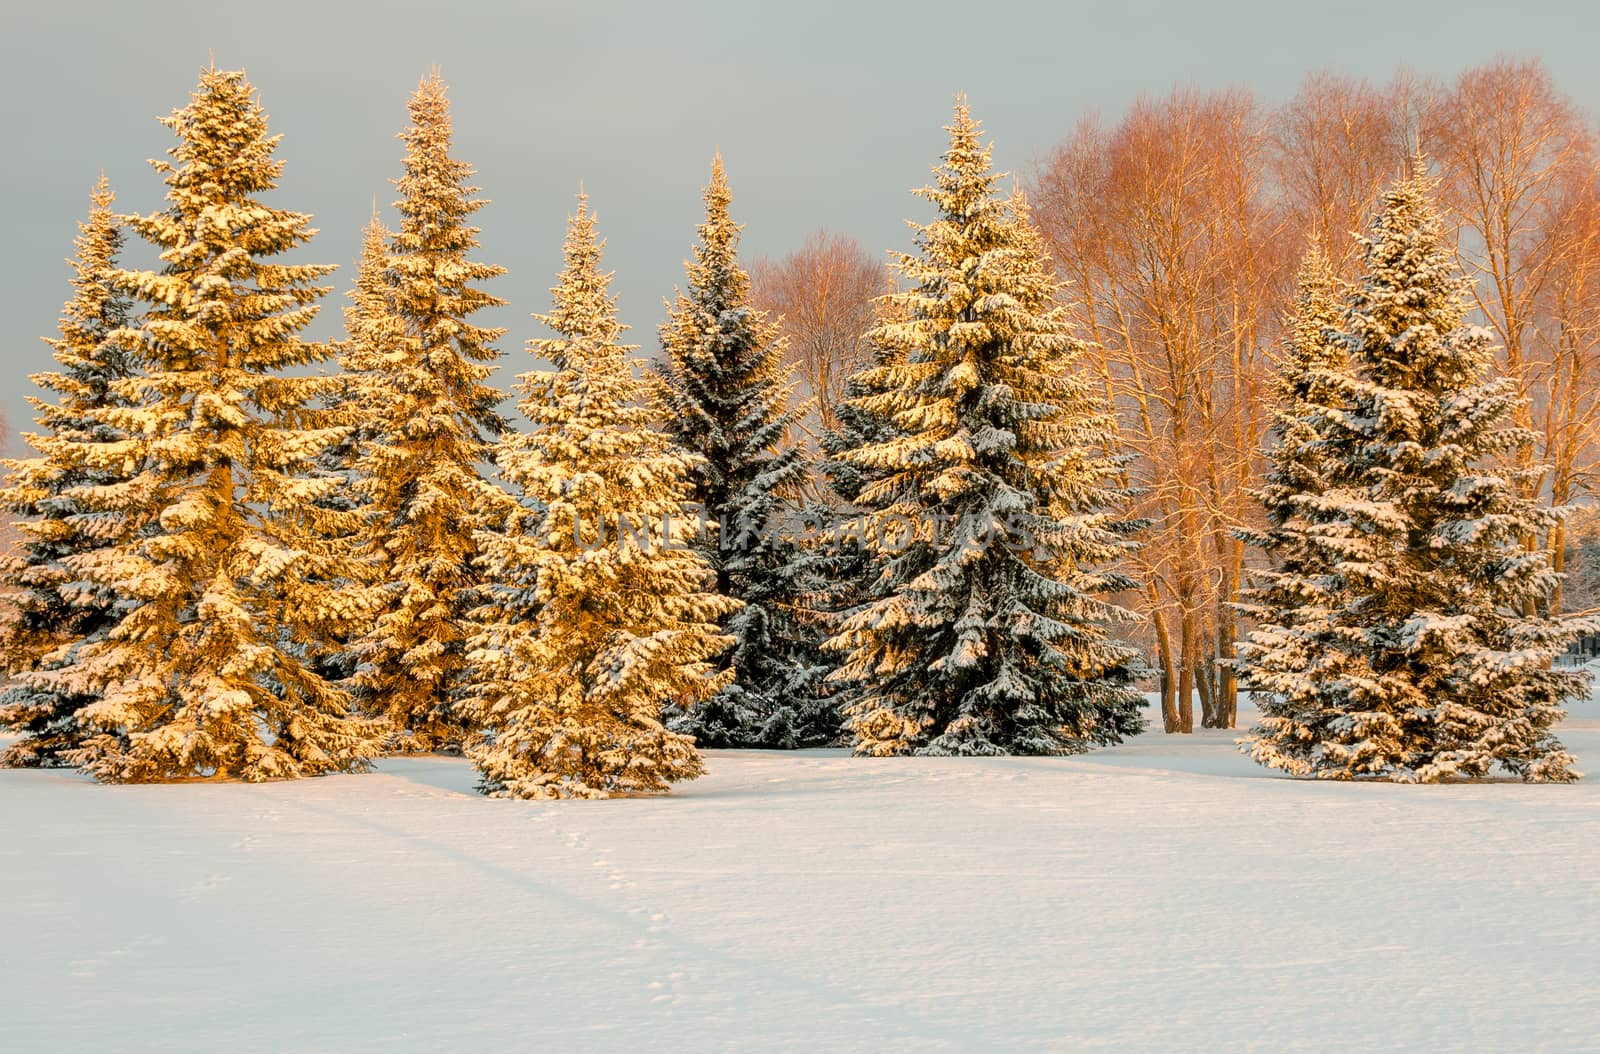 Snow covered trees in the morning light